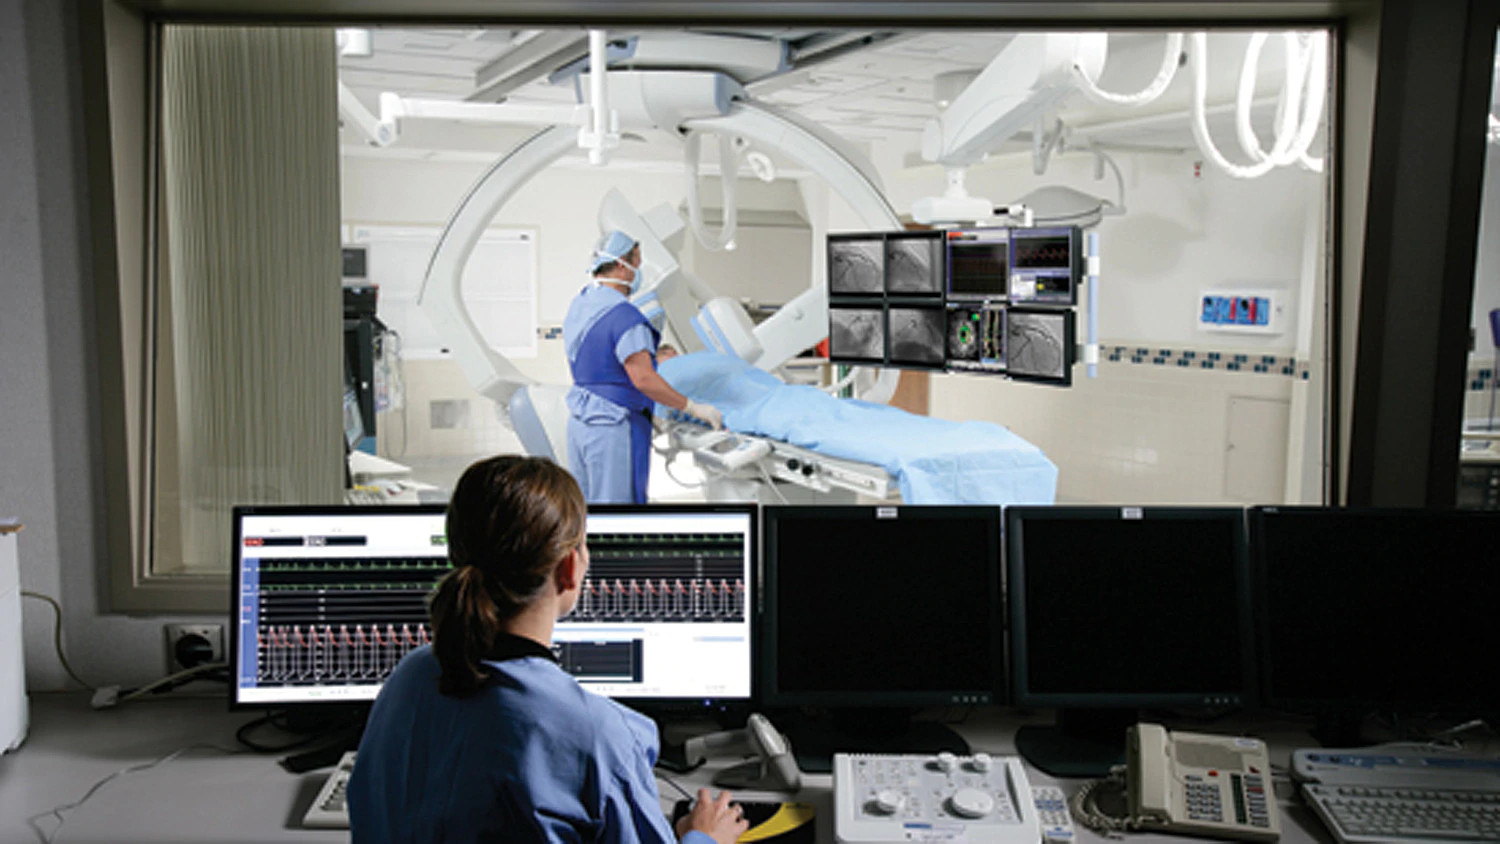 Severe MDHexRay bug affects 100+ GE Healthcare imaging systems